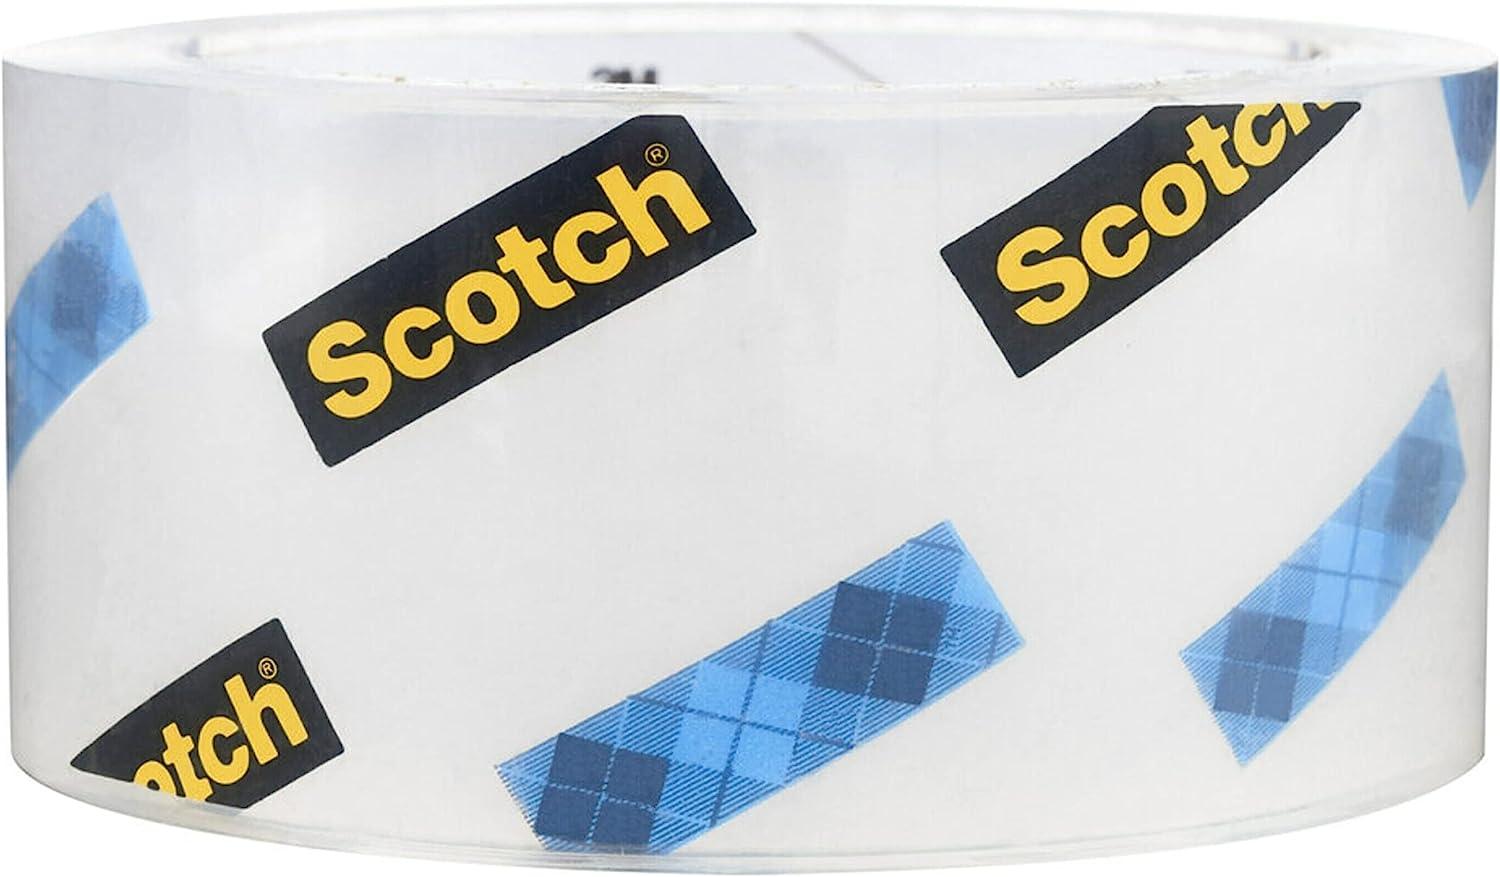 Scotch Heavy Duty Packaging Tape, 1.88 x 65.6 yd, Designed for